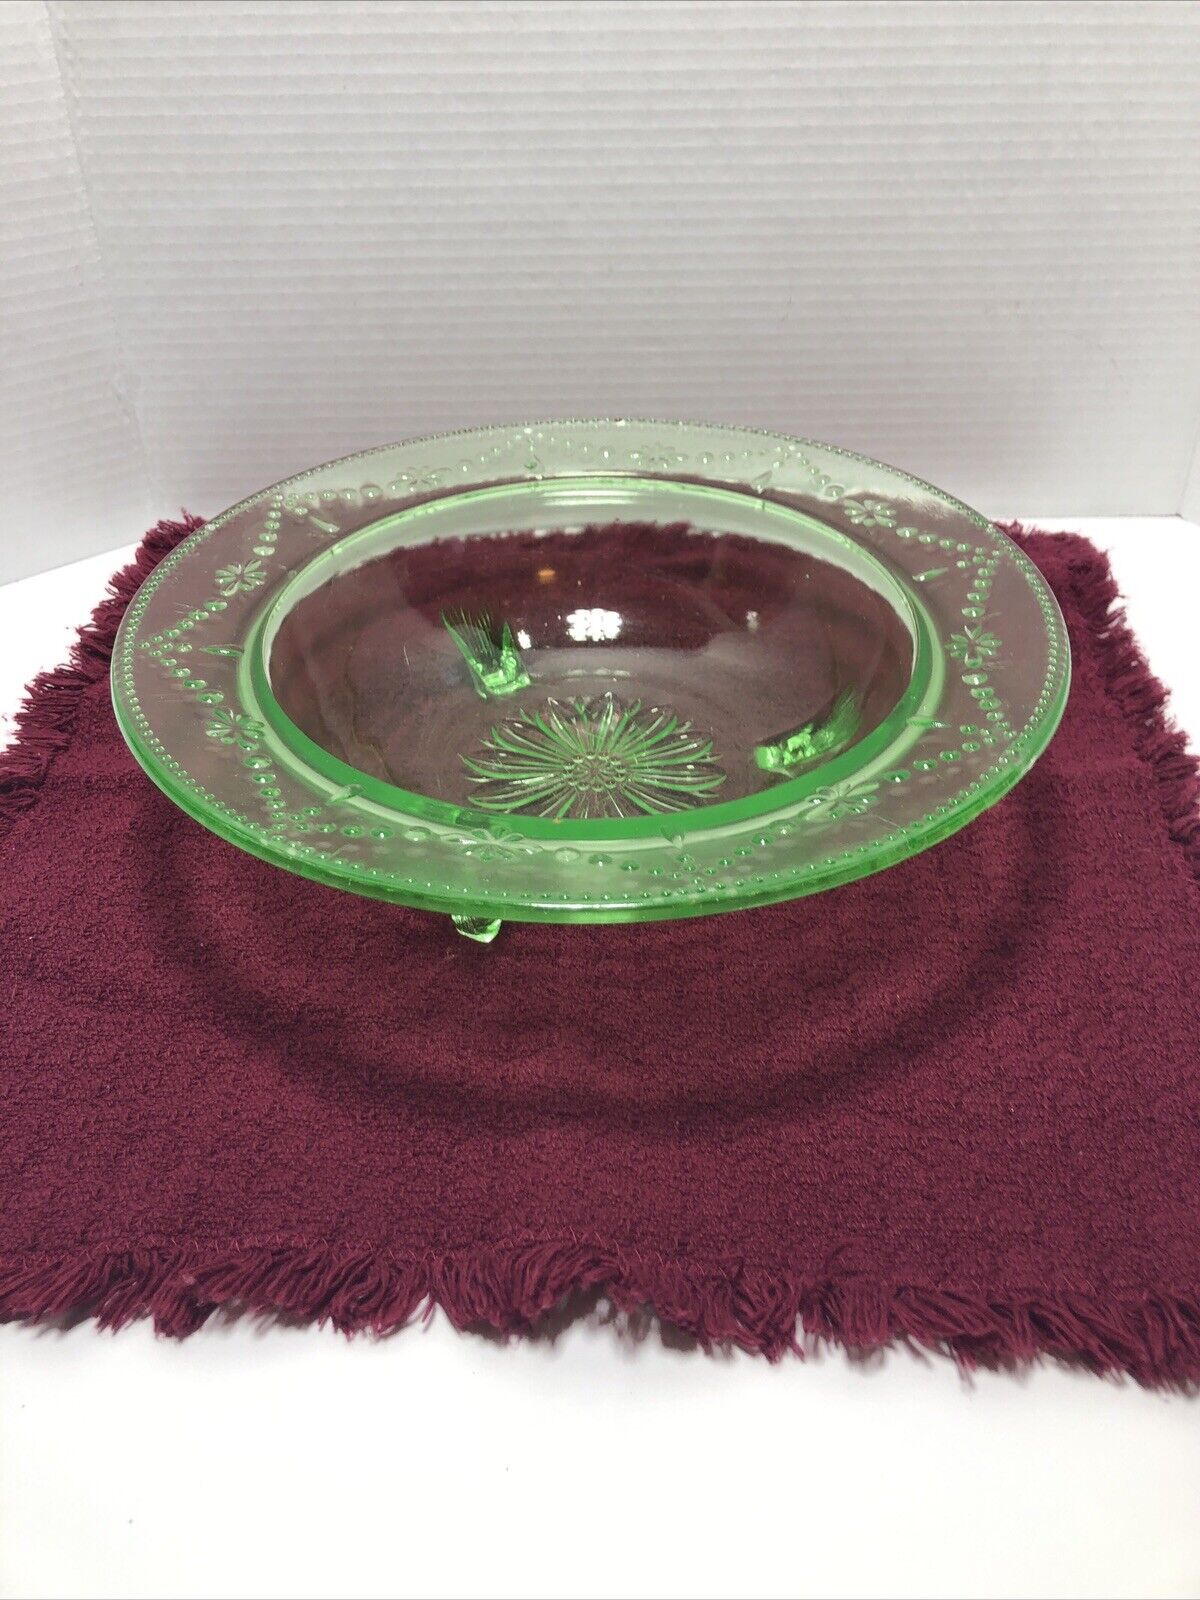 Green Depression Glass Footed Bowl 11” Antique